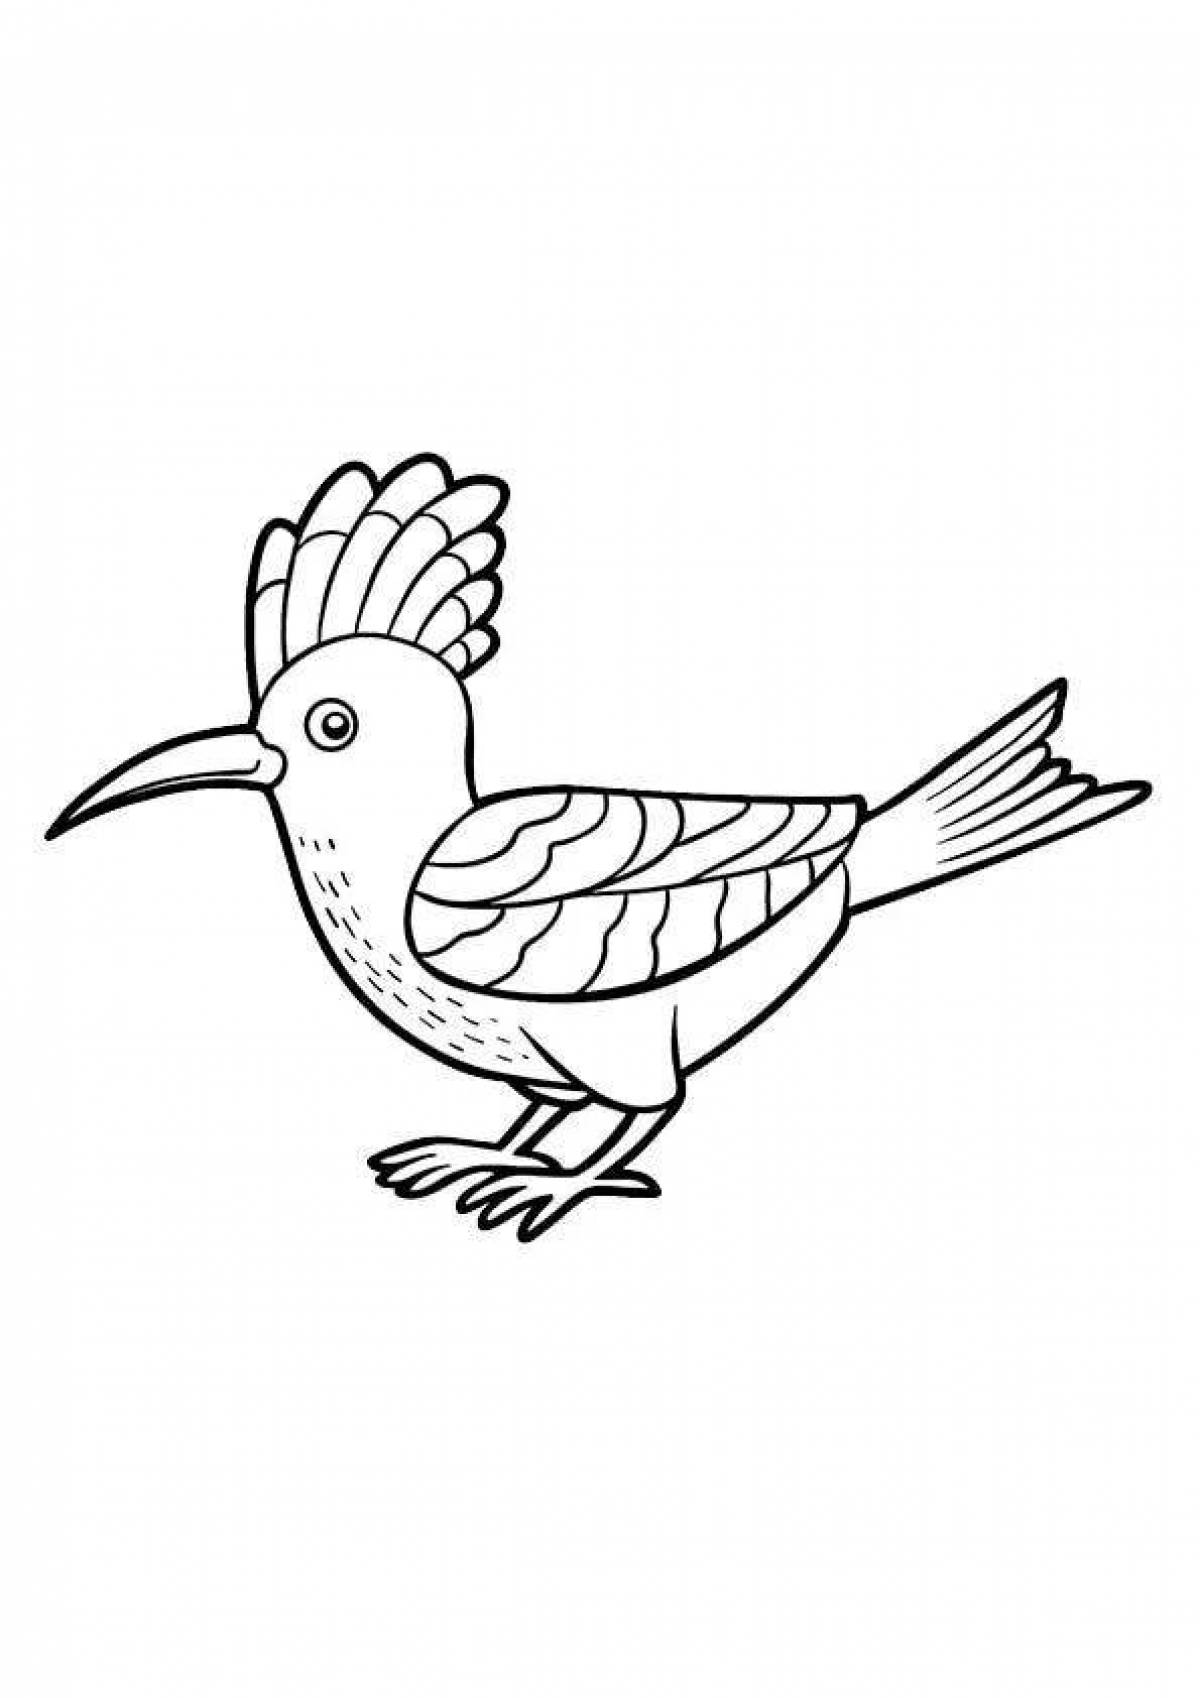 Colorful hoopoe coloring page